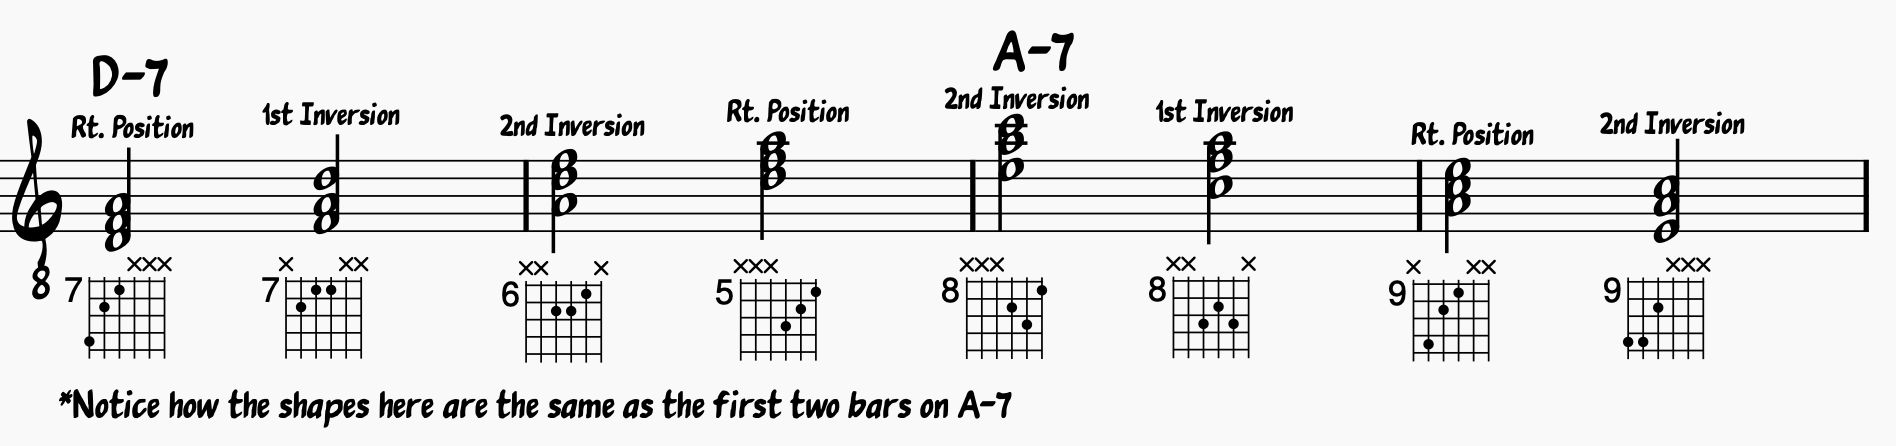 Bars 5 - 8 of an A minor blues using minor traids, major triads, and diminished triads